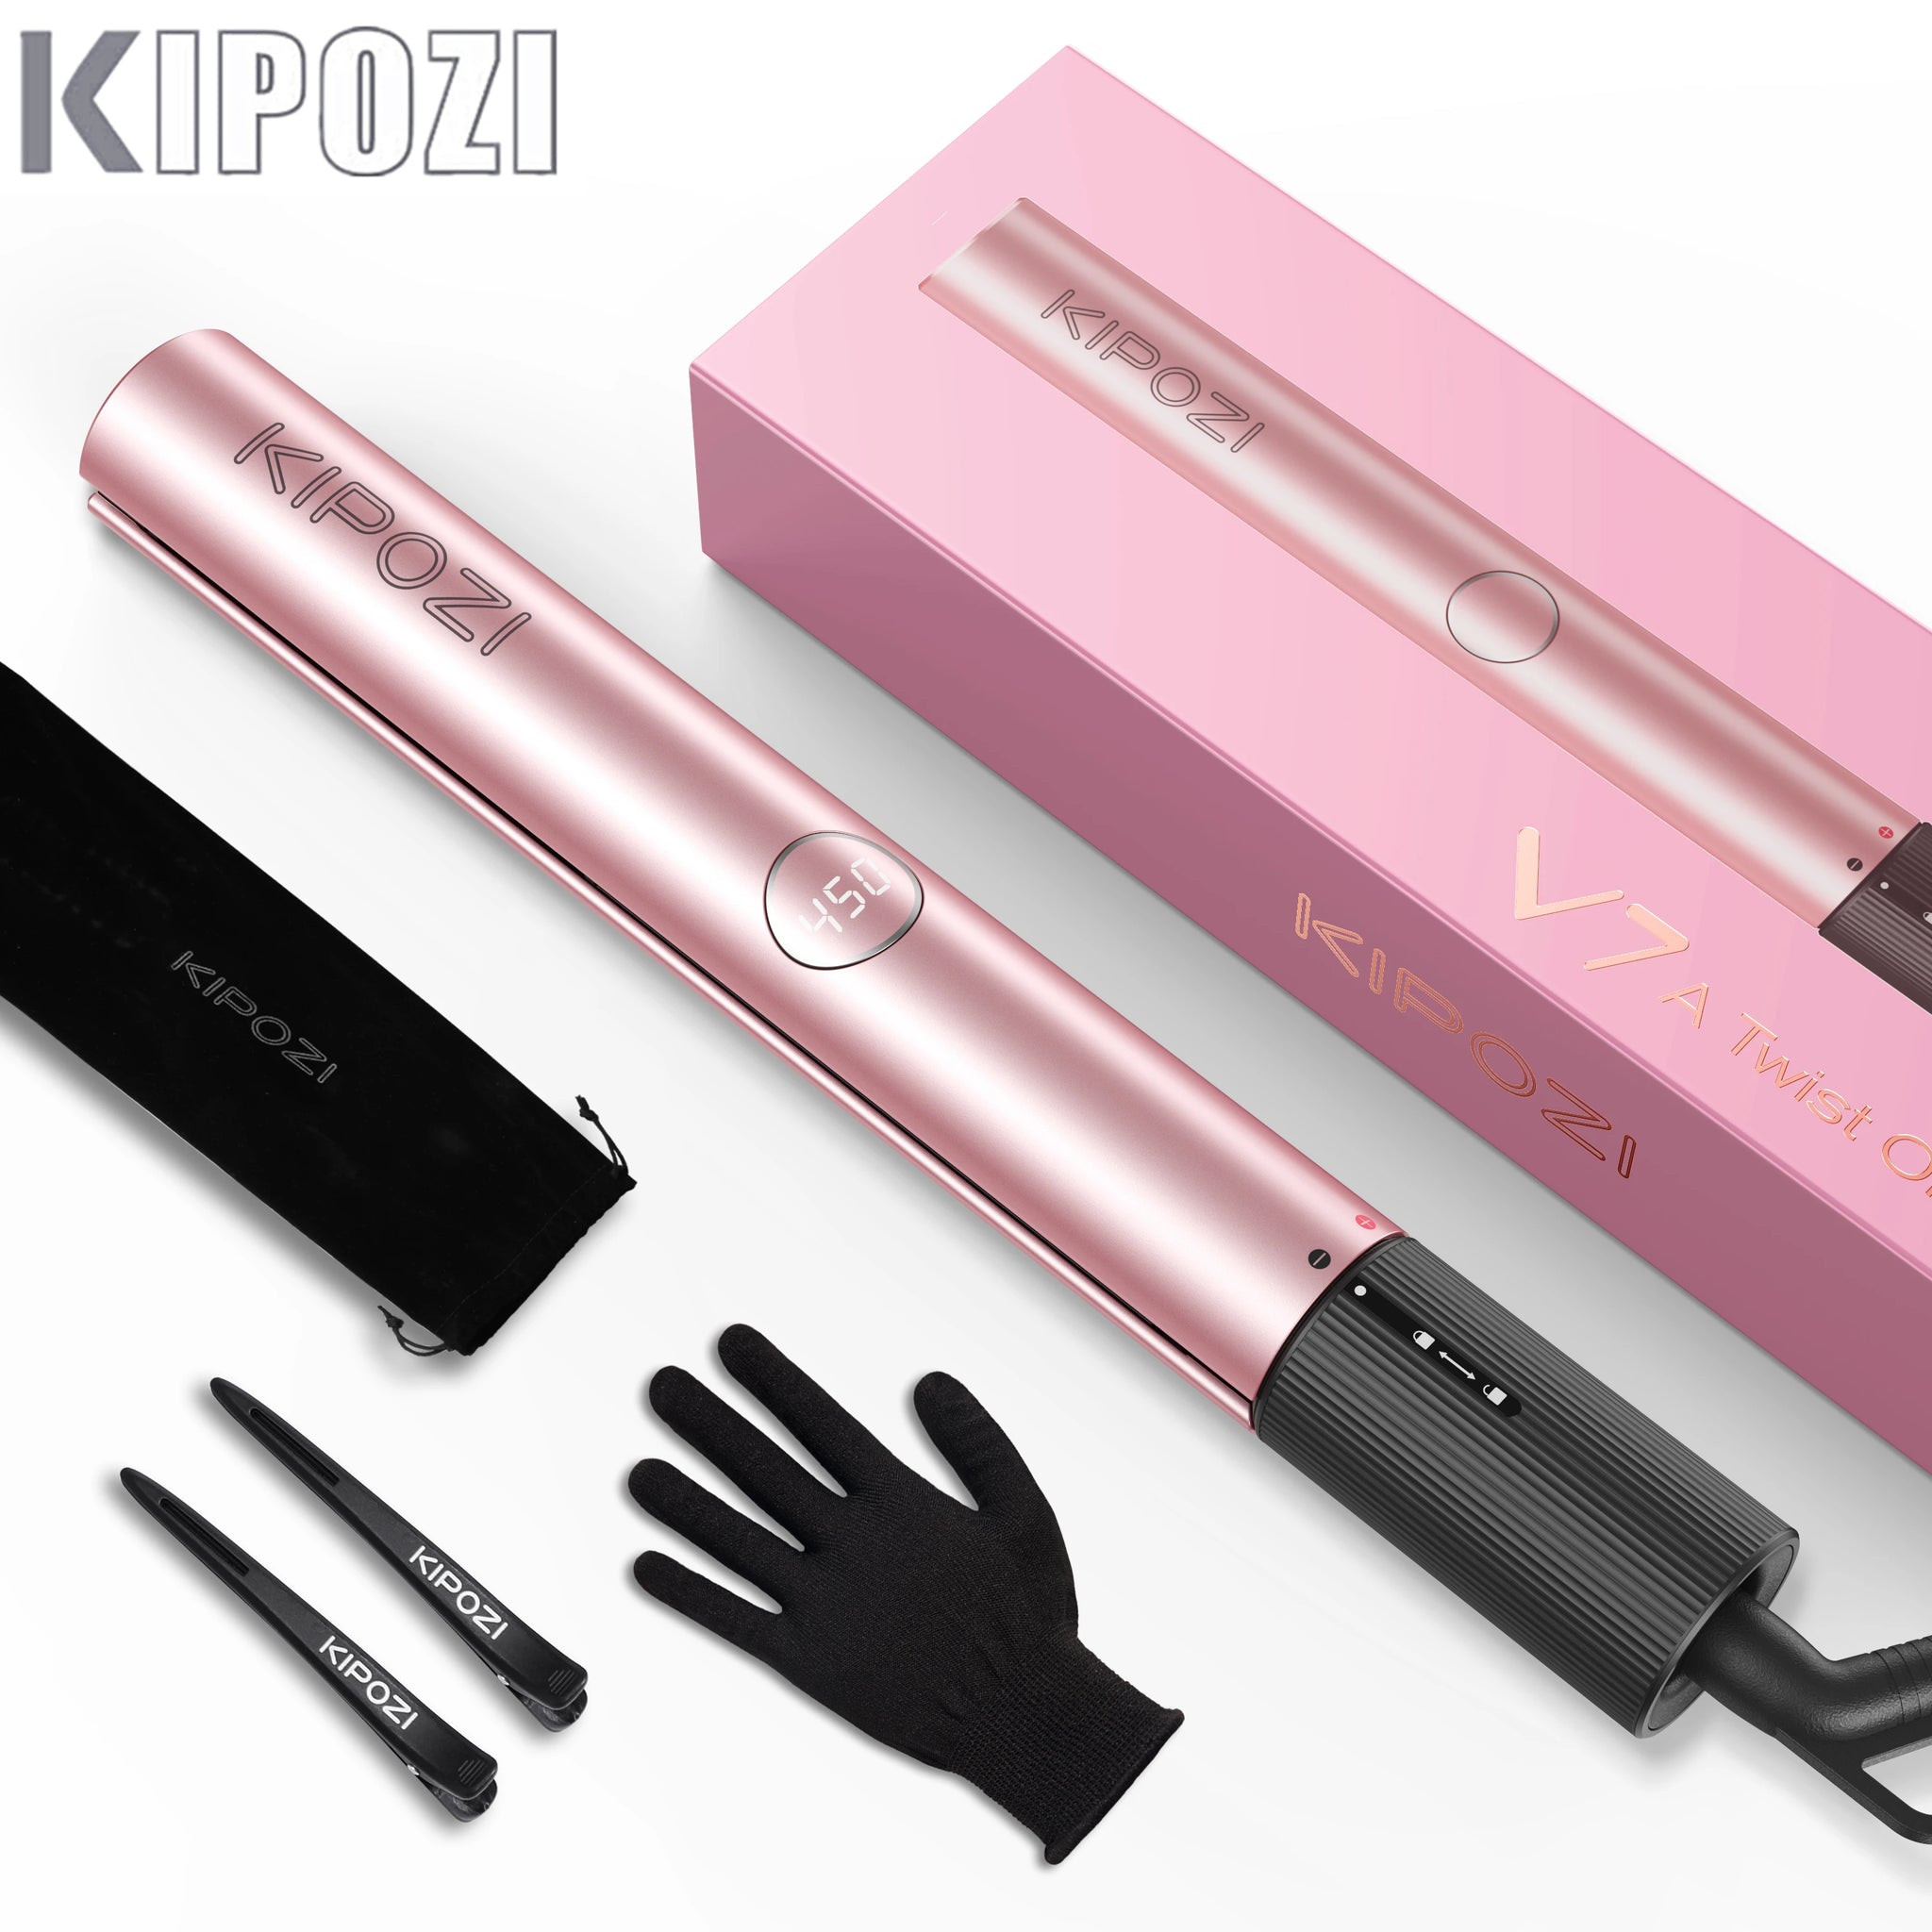 KIPOZI Professional Hair Striaghtener Nano Titanium Instant Heating Flat Iron 2 In 1 Curling Iron Hair Tool with LCD Display